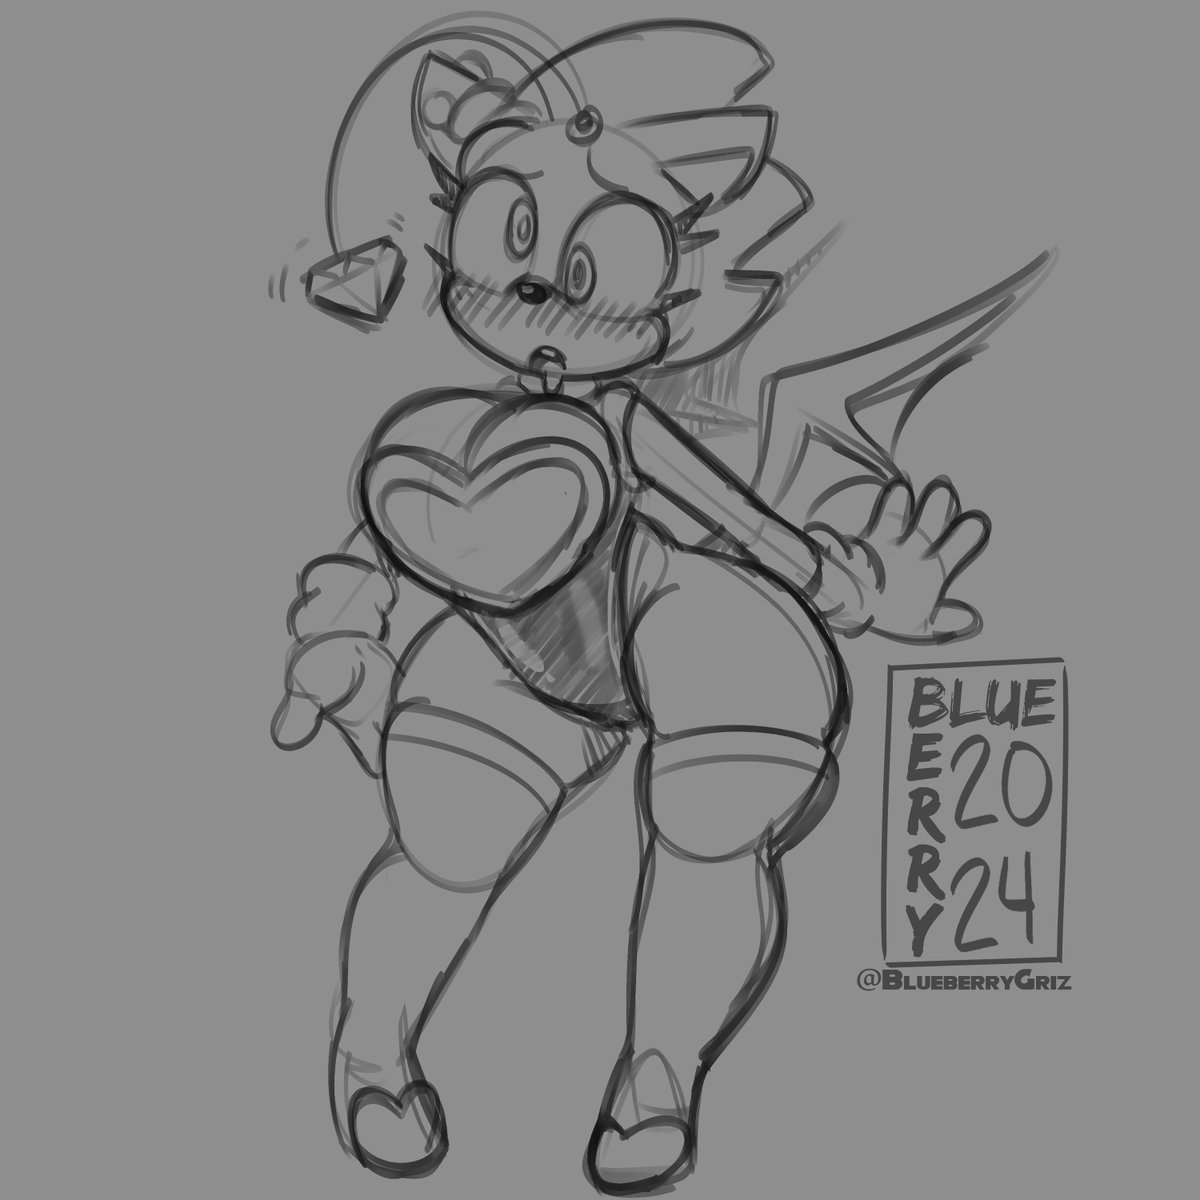 I also found out I'VE NEVER DRAWN C. SONIC IN A ROUGE OUTFIT. So I had to fix that and added in a bit of silly to it. Remember to follow the Emerald!